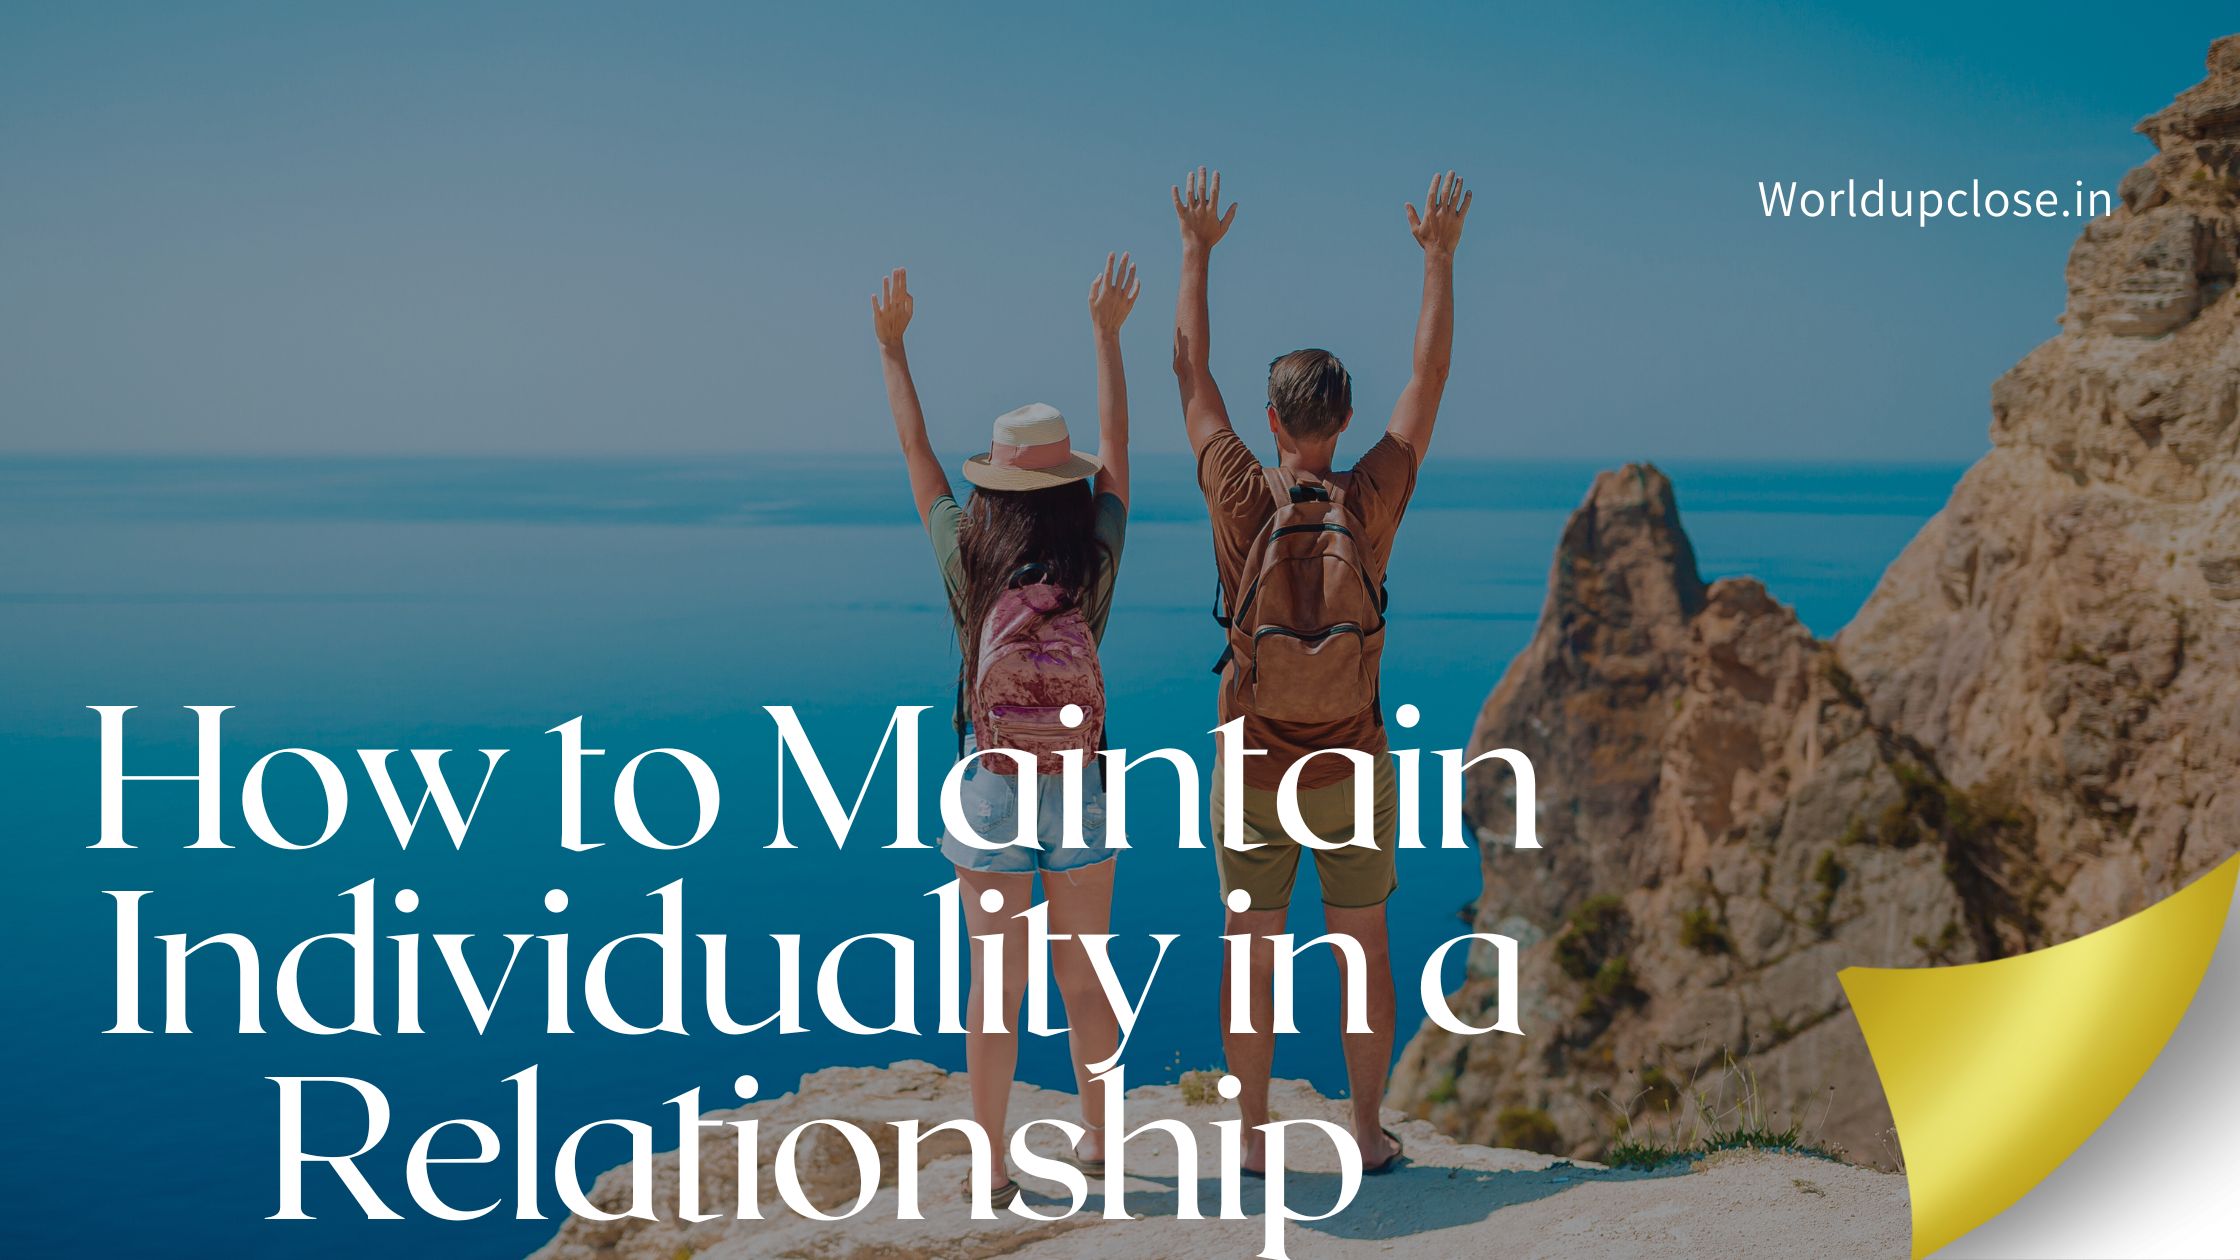 How to Maintain Individuality in a Relationship - 12 Successful Ways 4